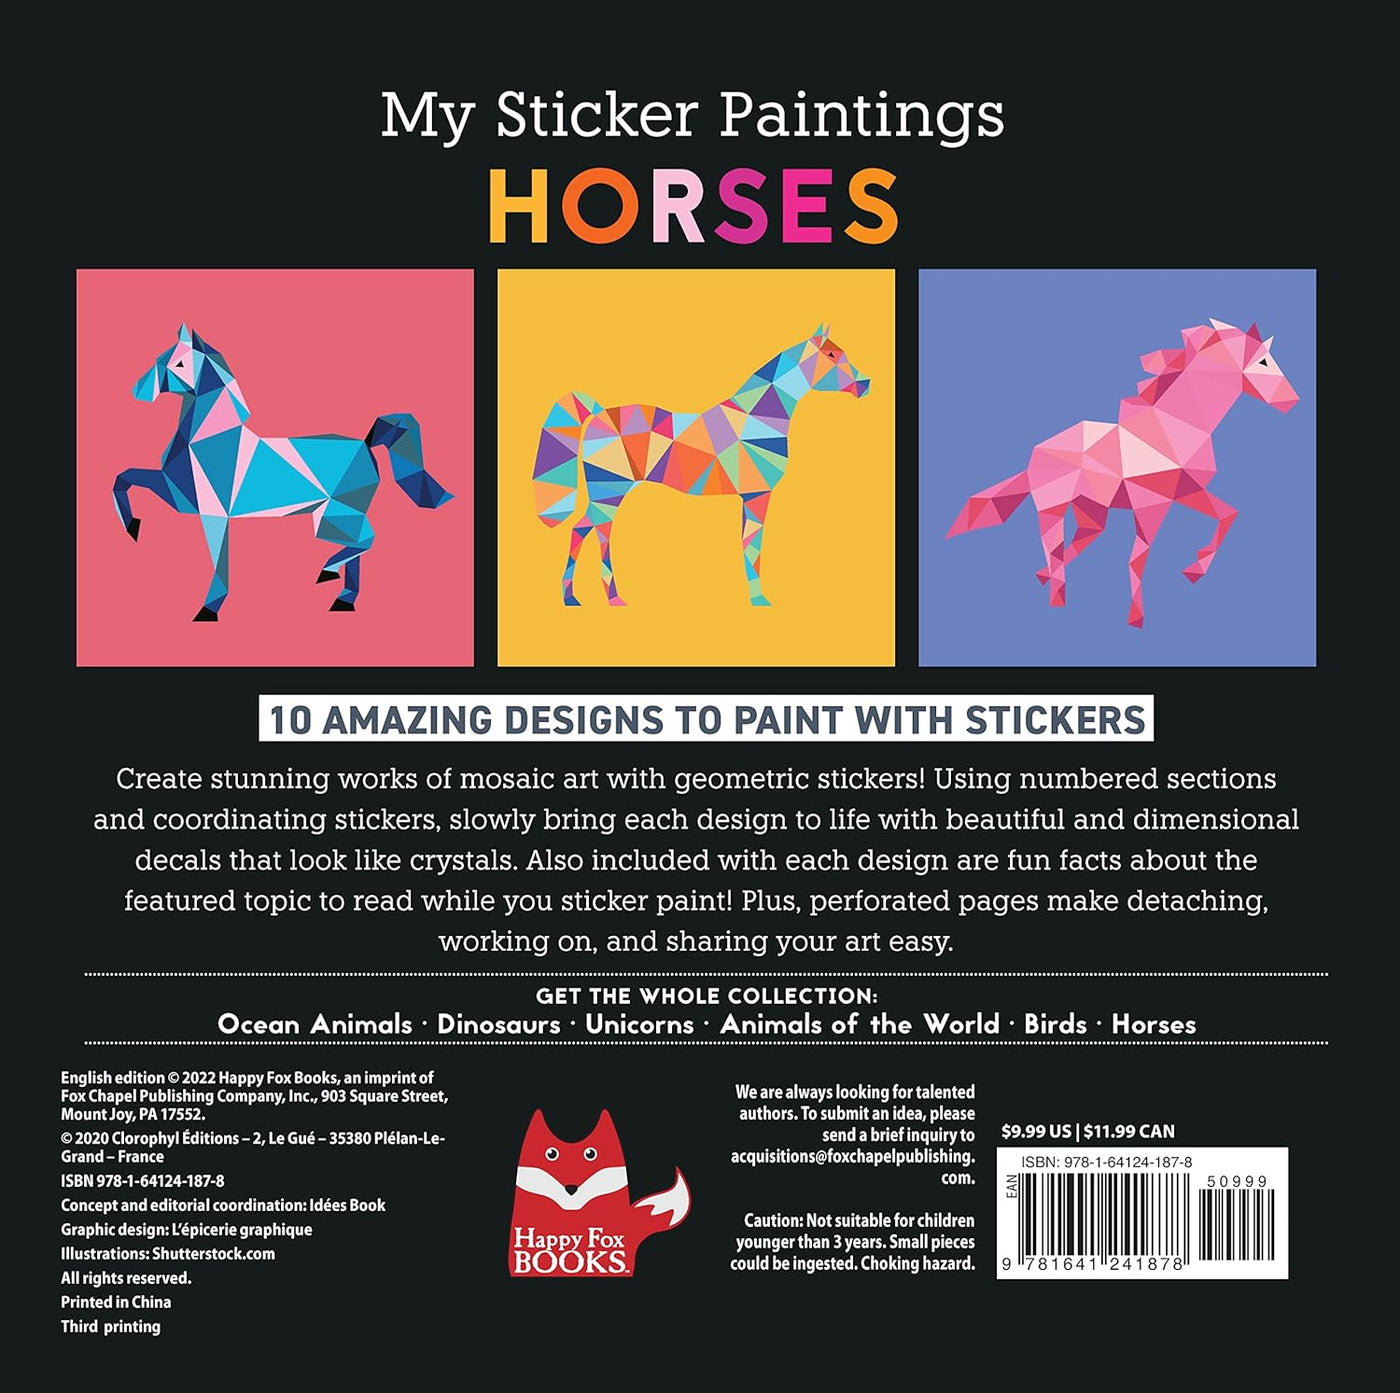 My Sticker Paintings Horses Book